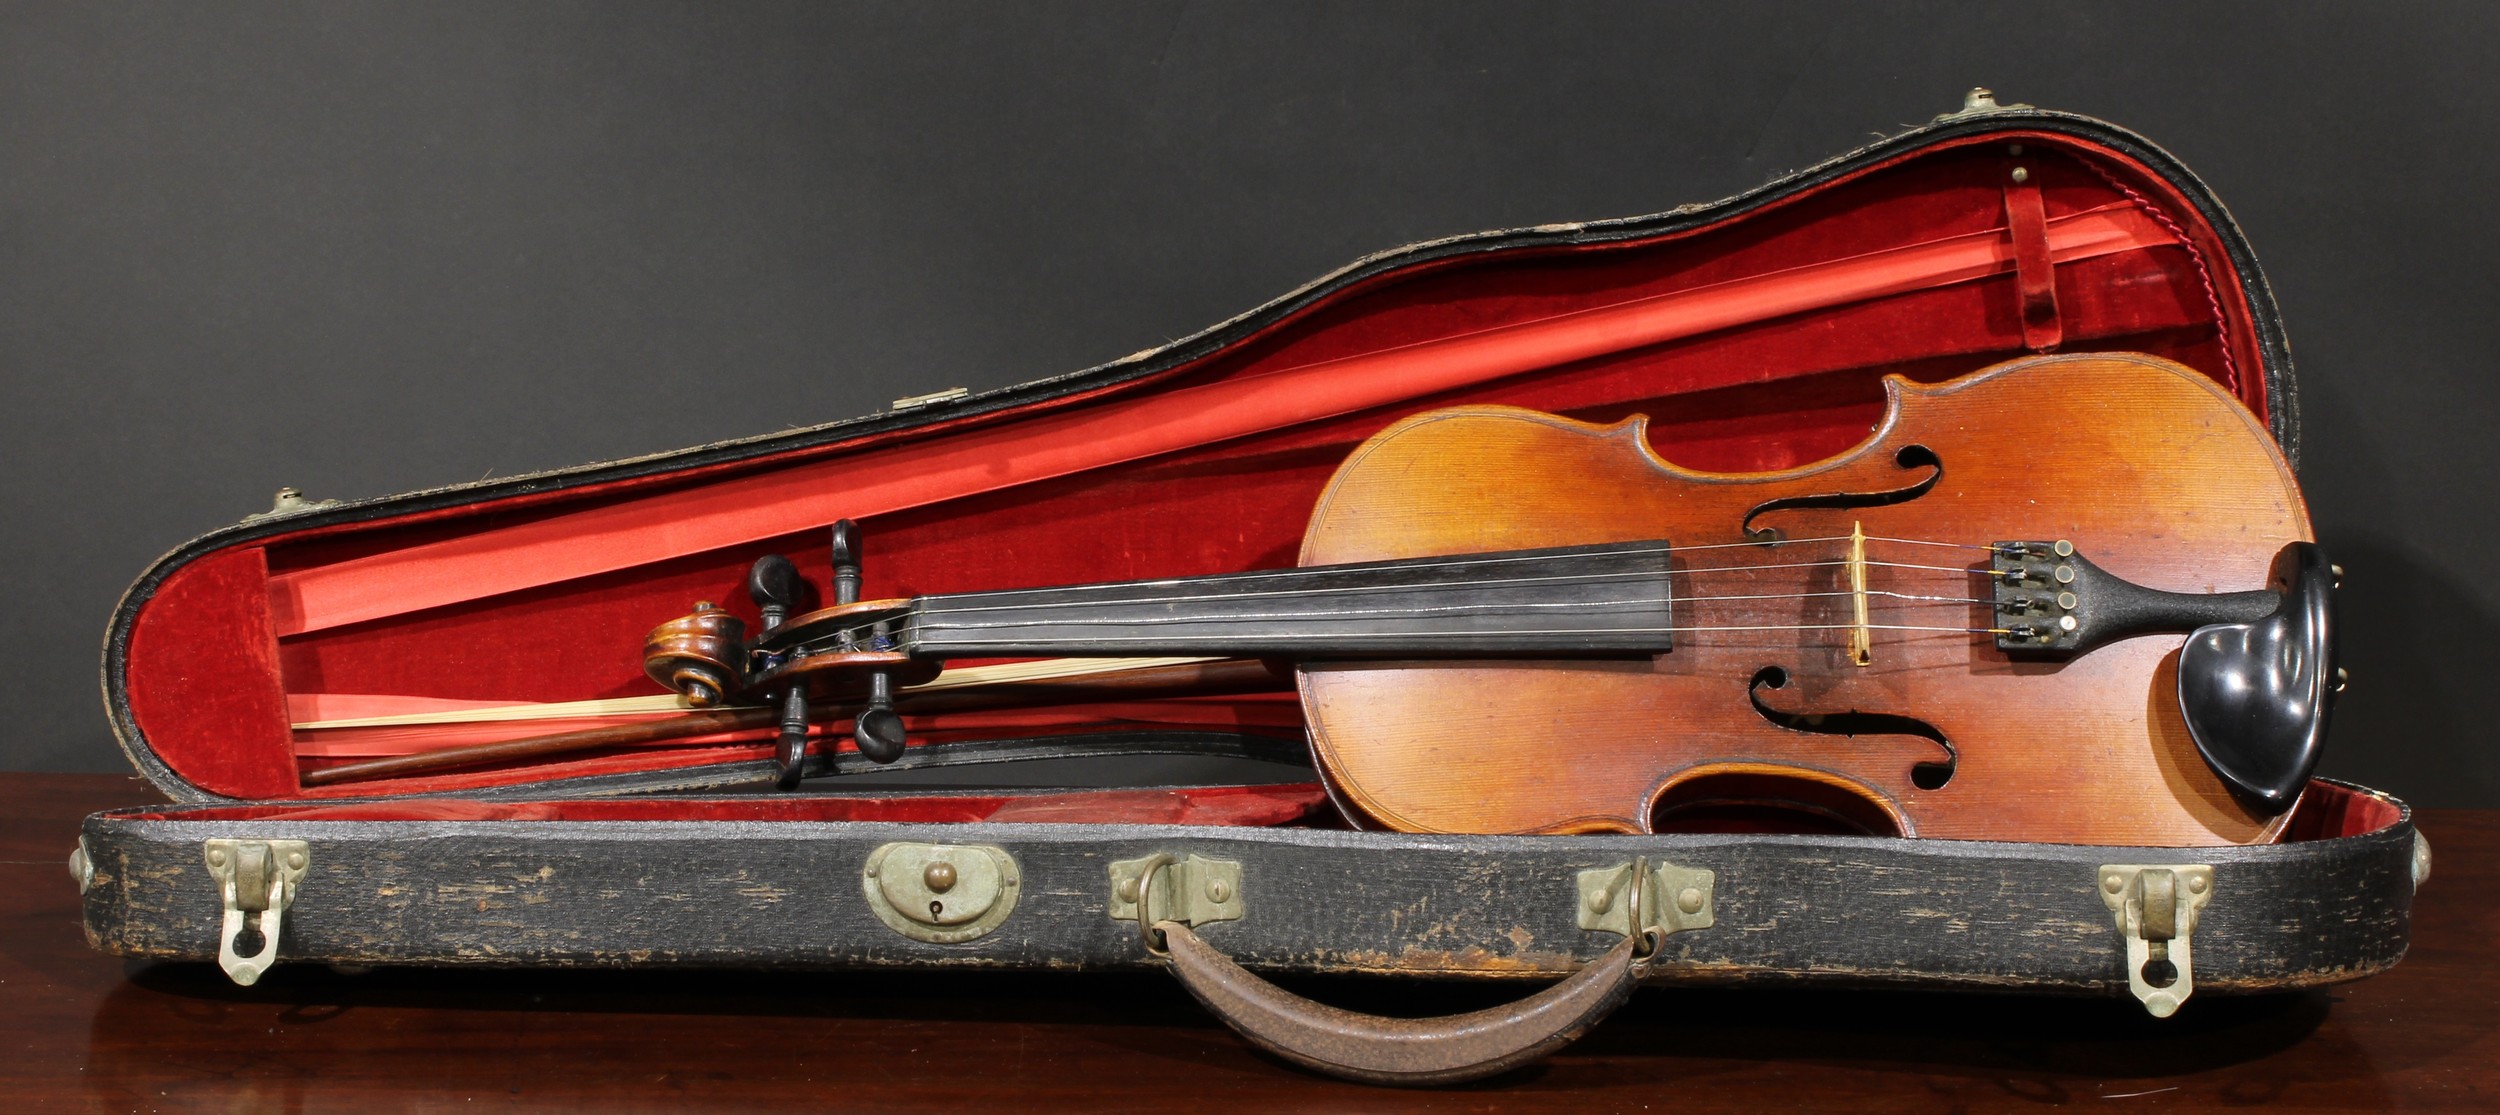 A violin, the two-piece back 36cm long excluding button, Stradiuarius 1721 label, ebonised tuning